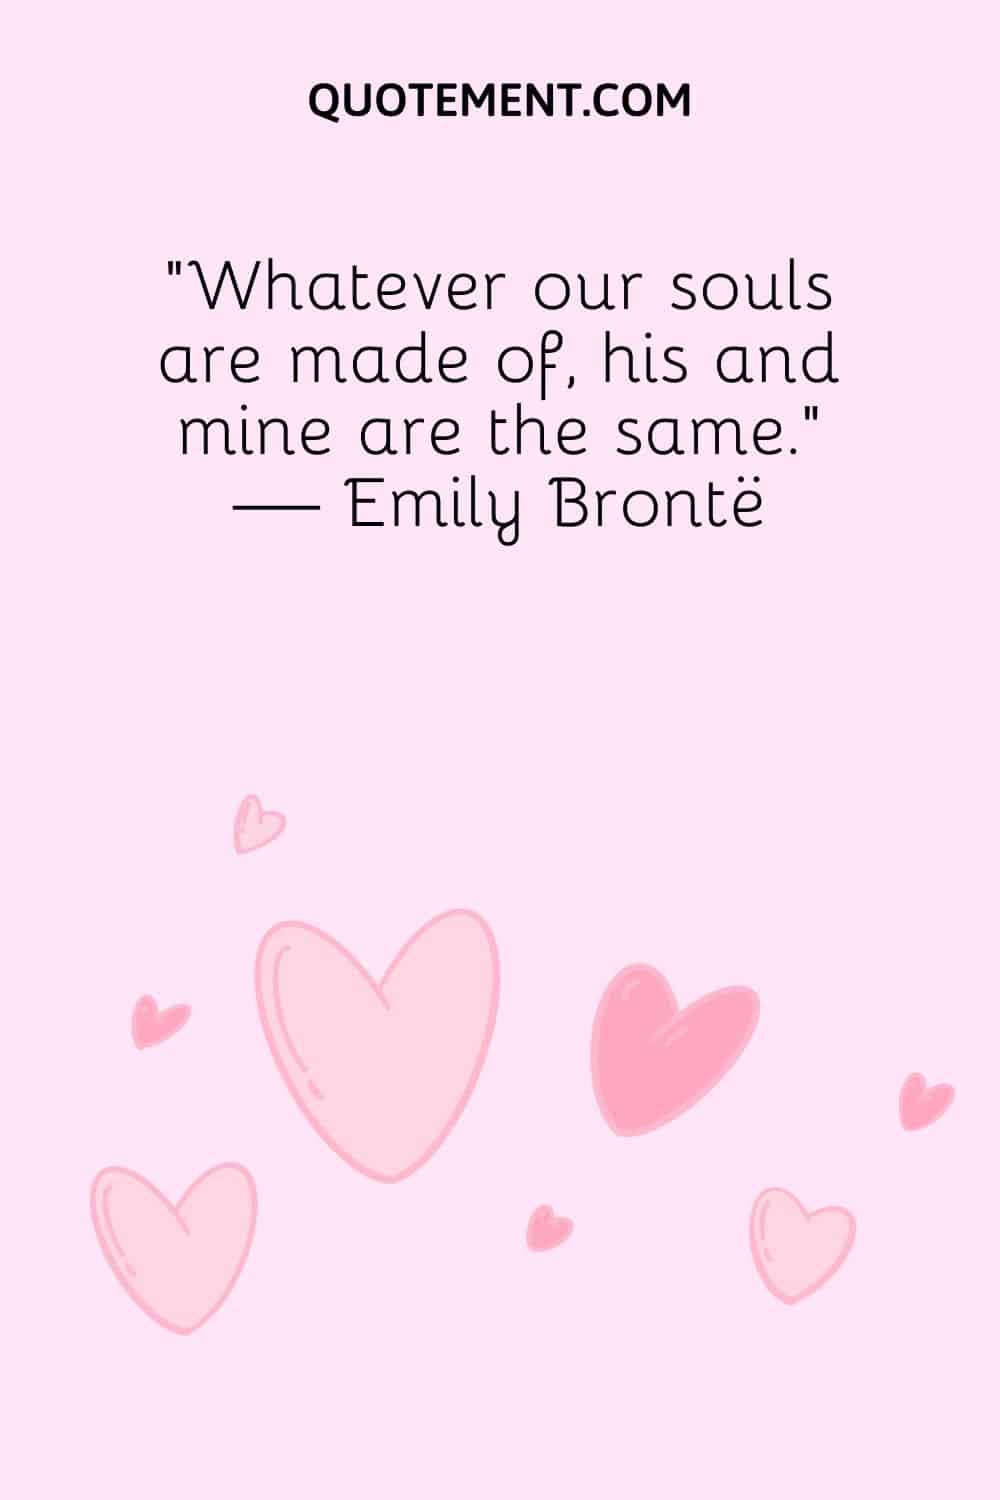 Whatever our souls are made of, his and mine are the same. — Emily Brontë